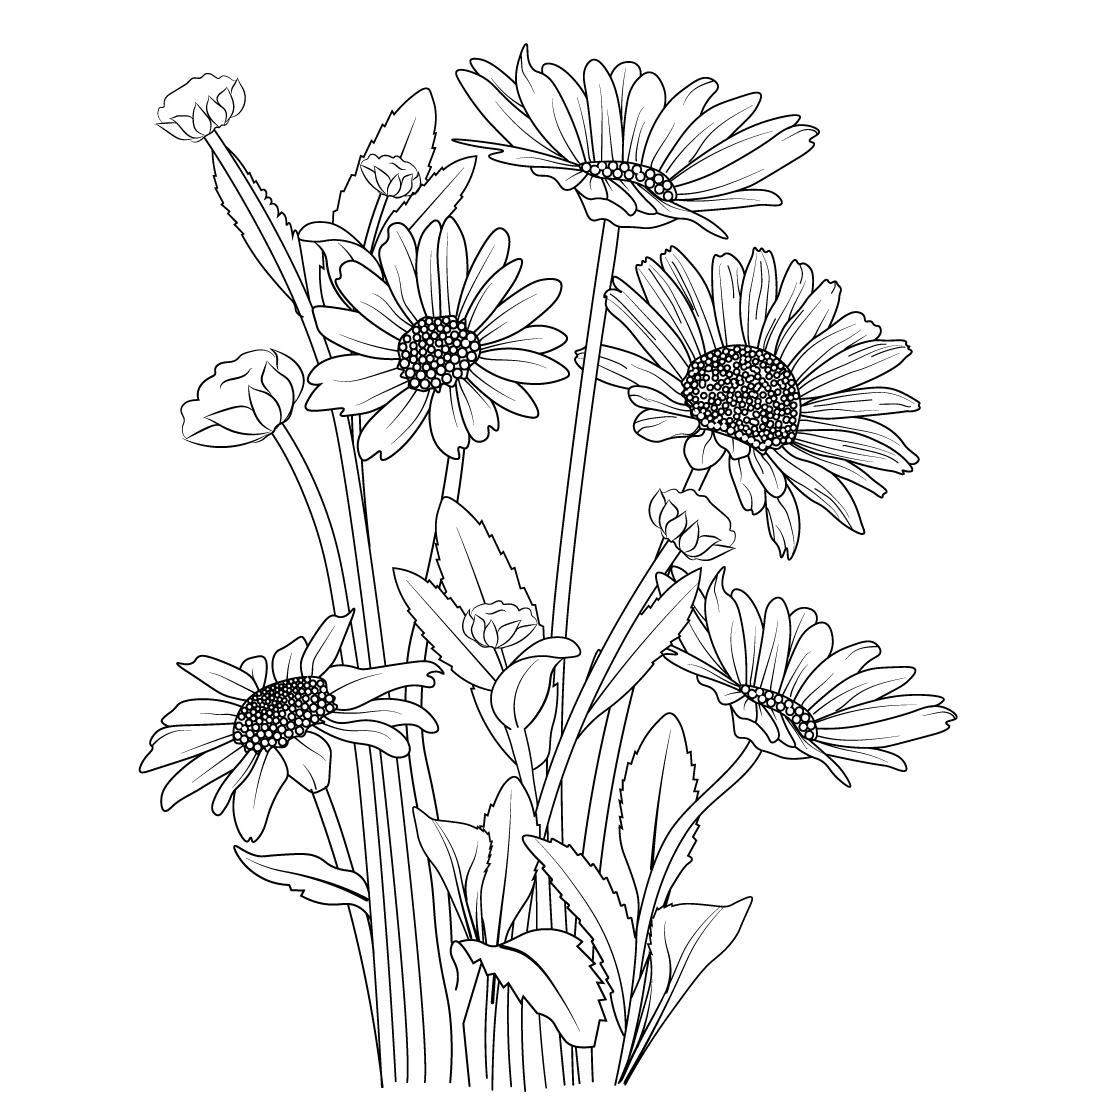 Outline Daisy flower drawing and botanical daisy flower illustration daisy vecetor art preview image.